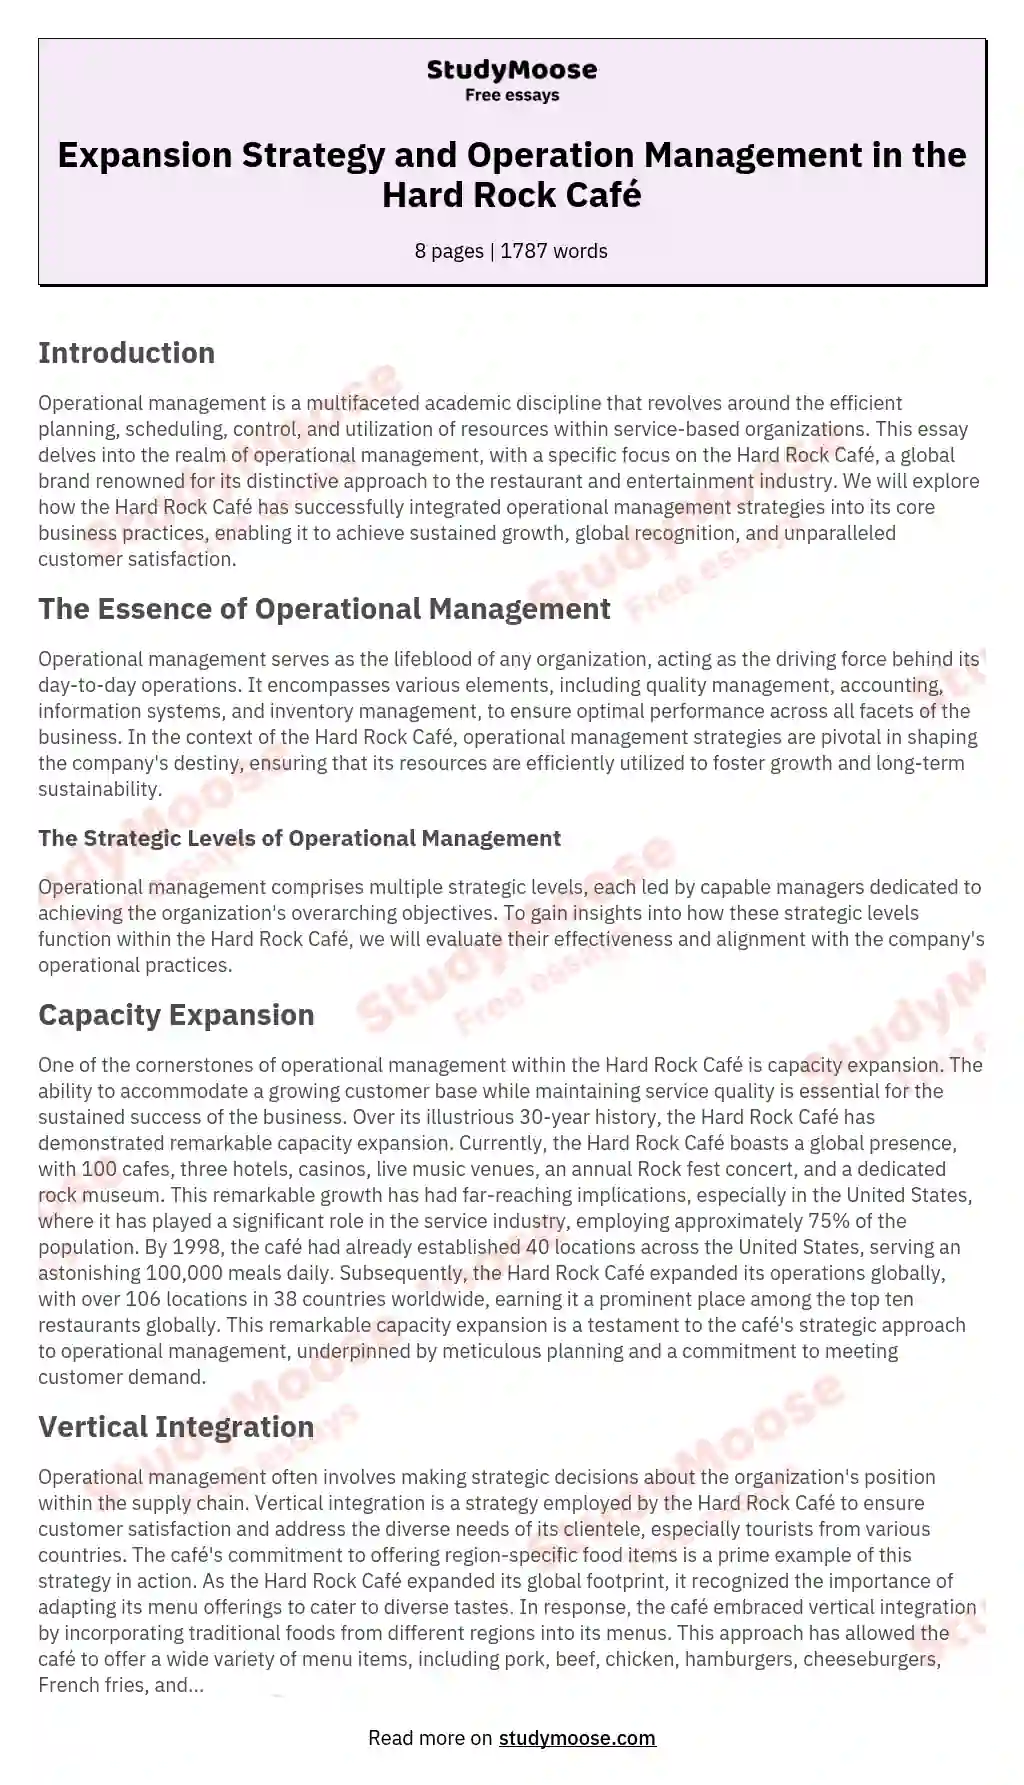 Expansion Strategy and Operation Management in the Hard Rock Café essay